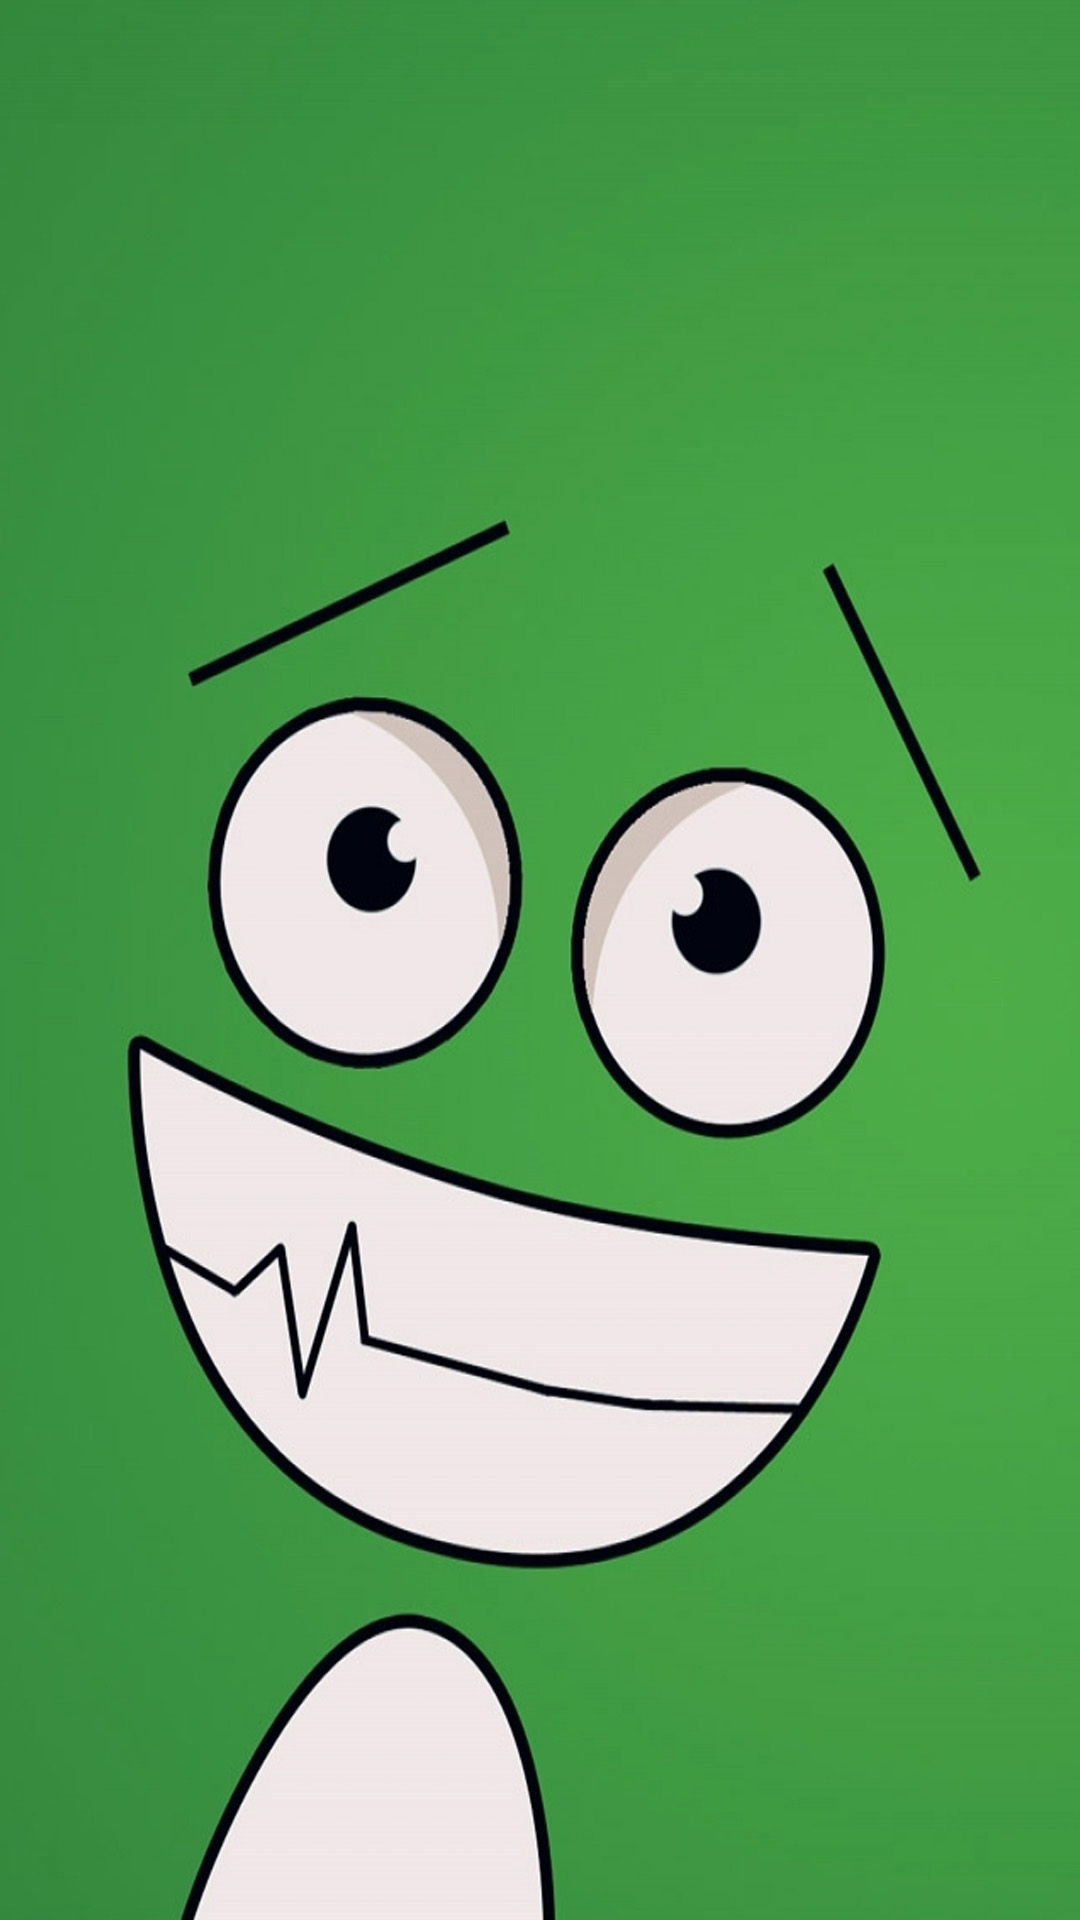 Green Smiley Android wallpaper